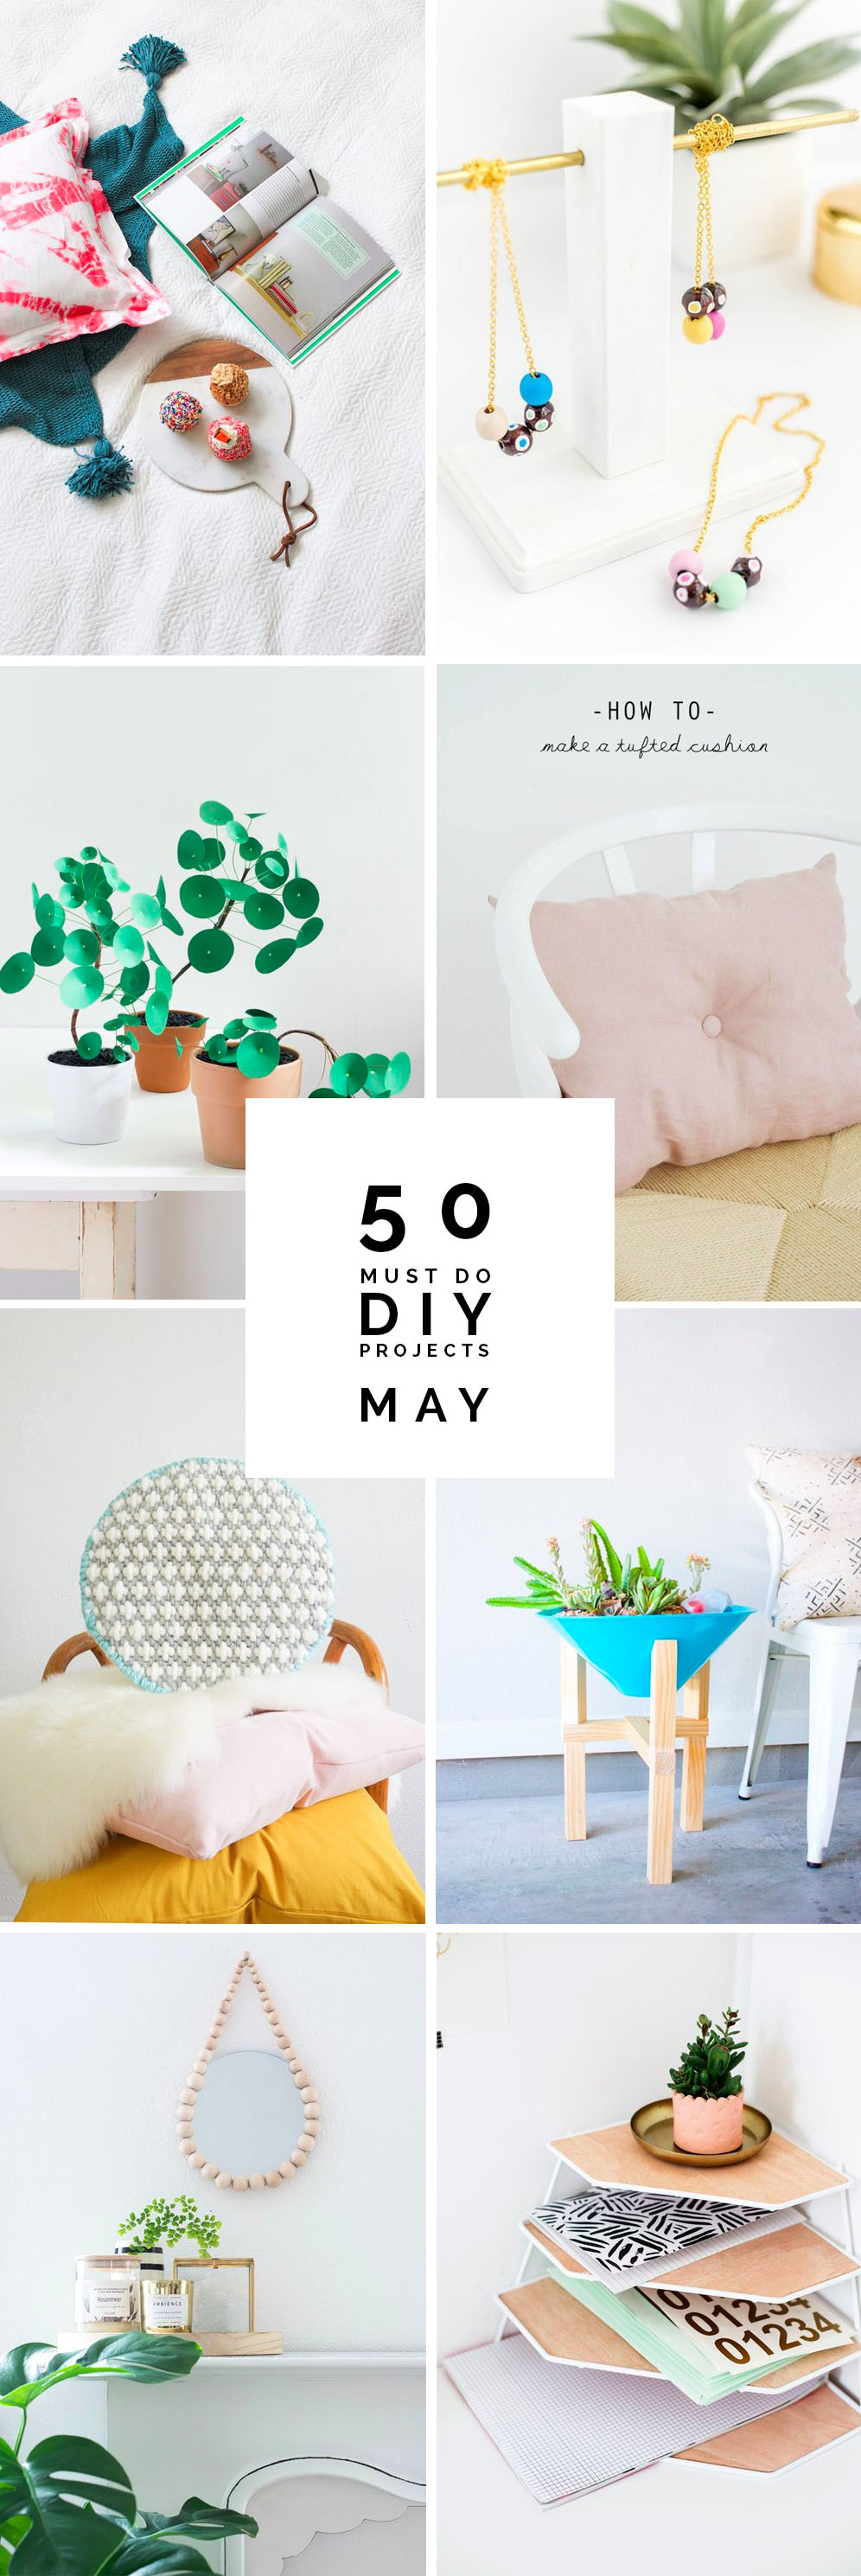 50 Must do DIY Projects | May